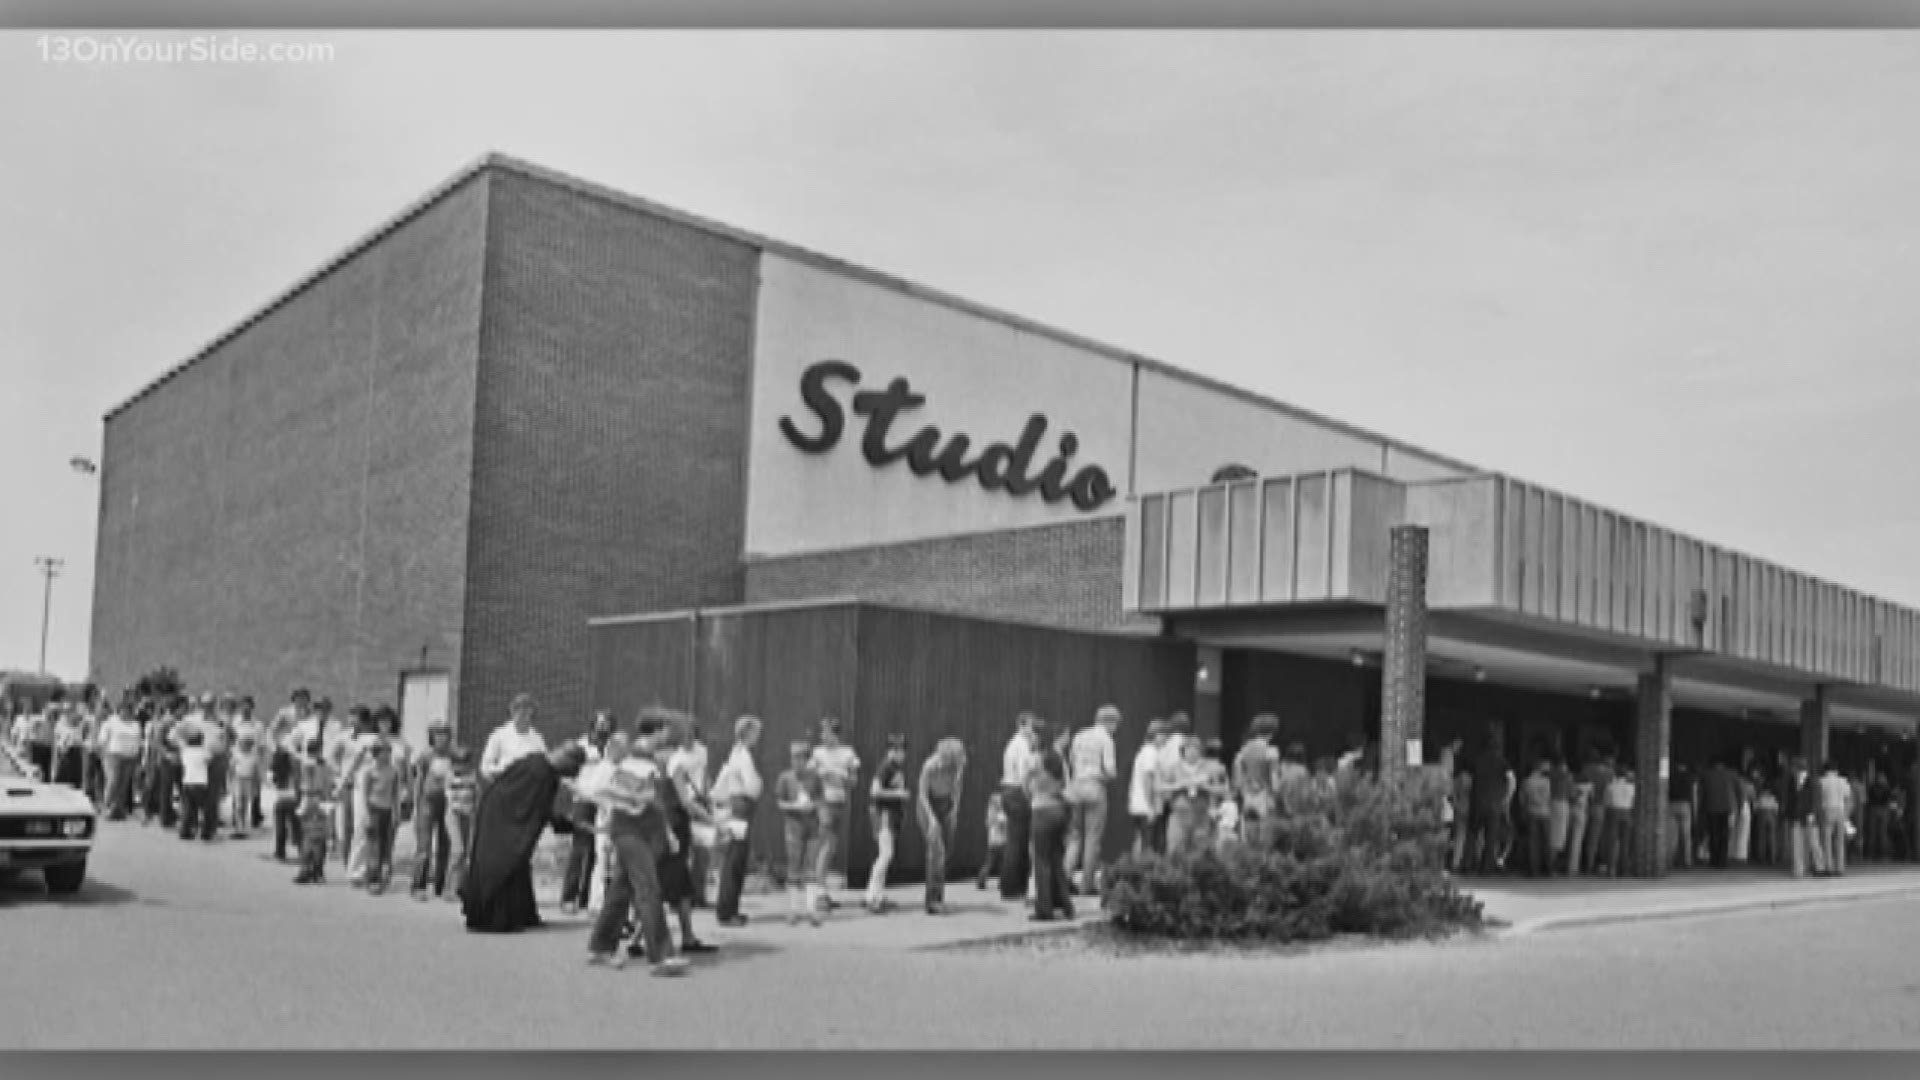 13 ON YOUR SIDE's Kirk Montgomery caught up with Ron Van Timmermen to unpack some of the history of Studio 28.